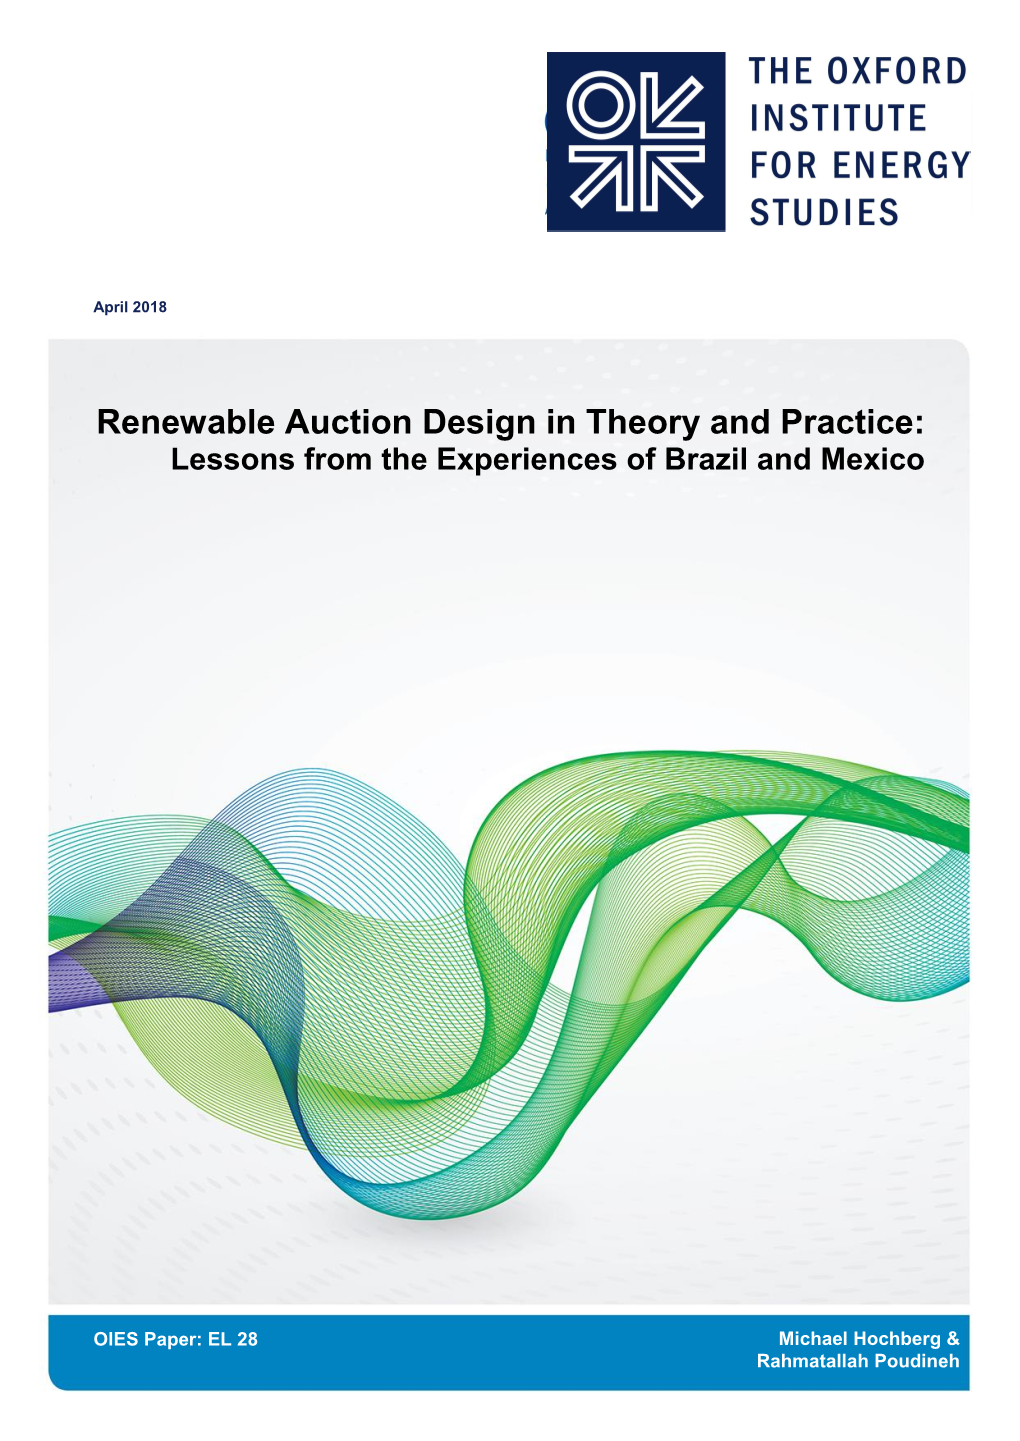 Renewable Auction Design in Theory and Practice: Lessons from the Experiences of Brazil and Mexico